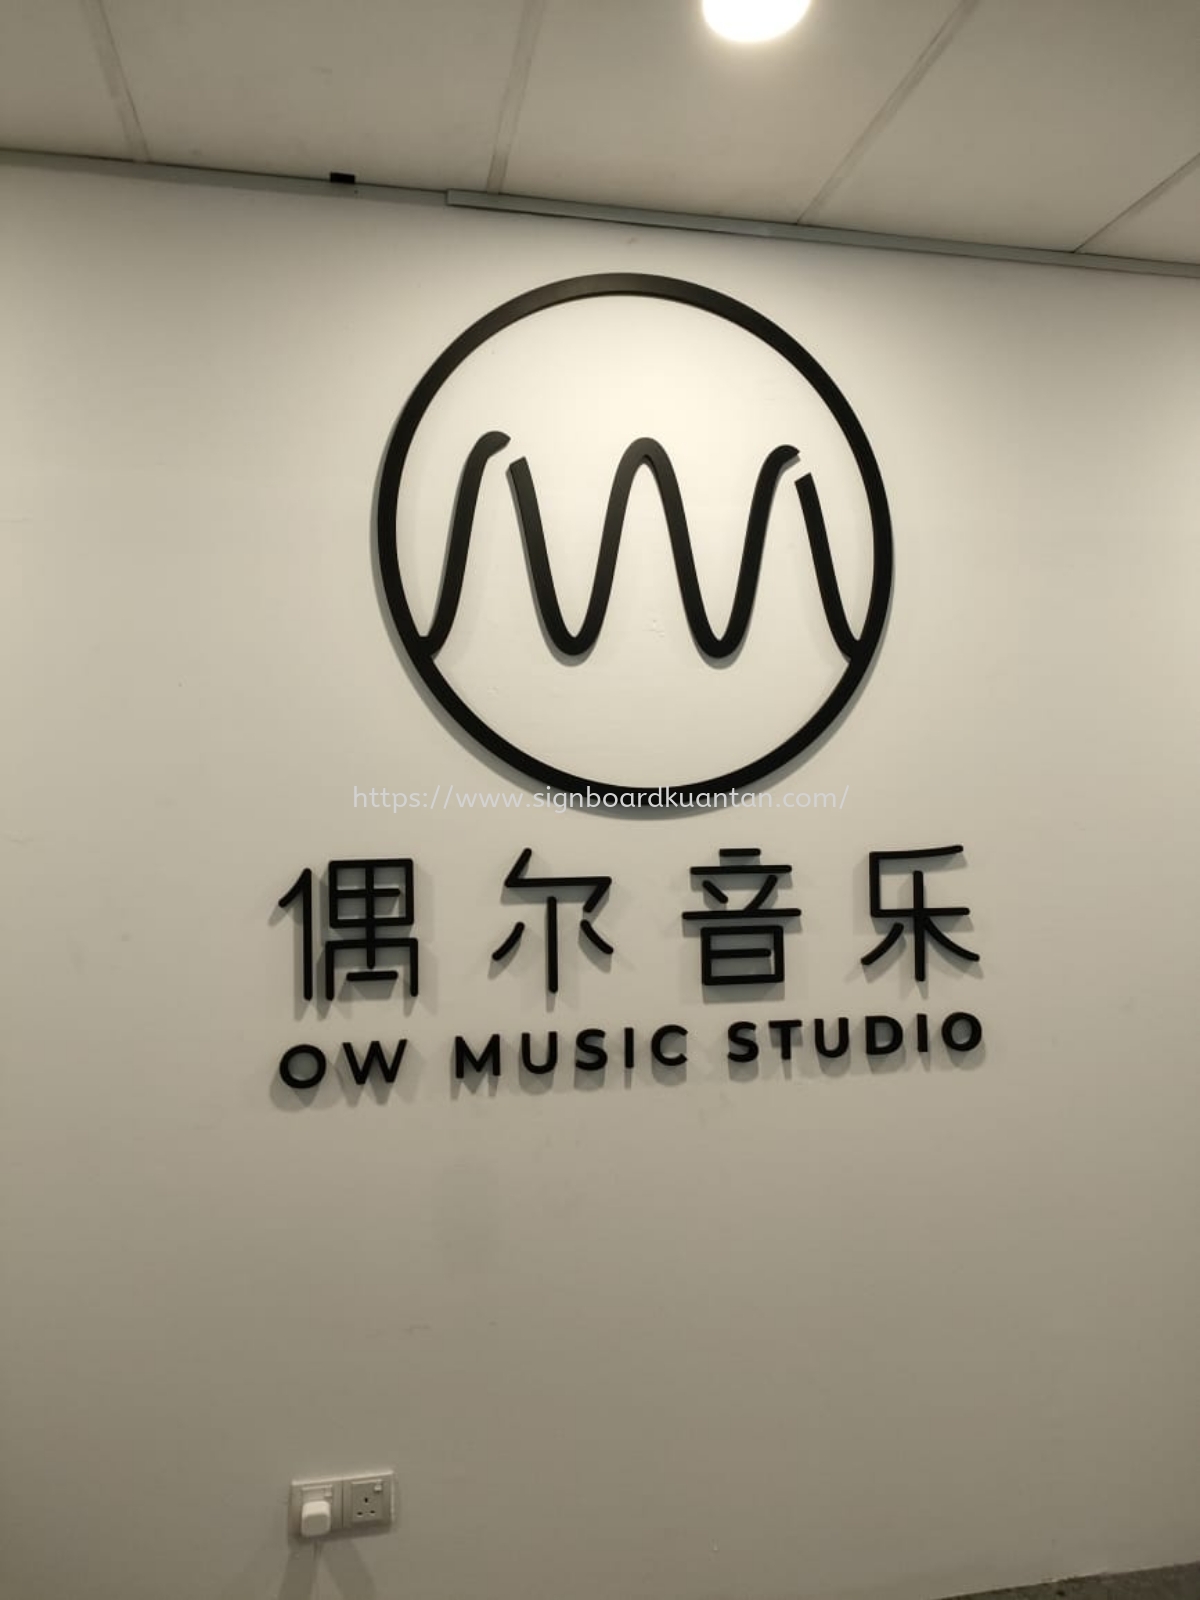 OW MUSIC STUDIO PVC LETTERING AND LOGO SIGNAGE SIGNBOARD AT KERTEH